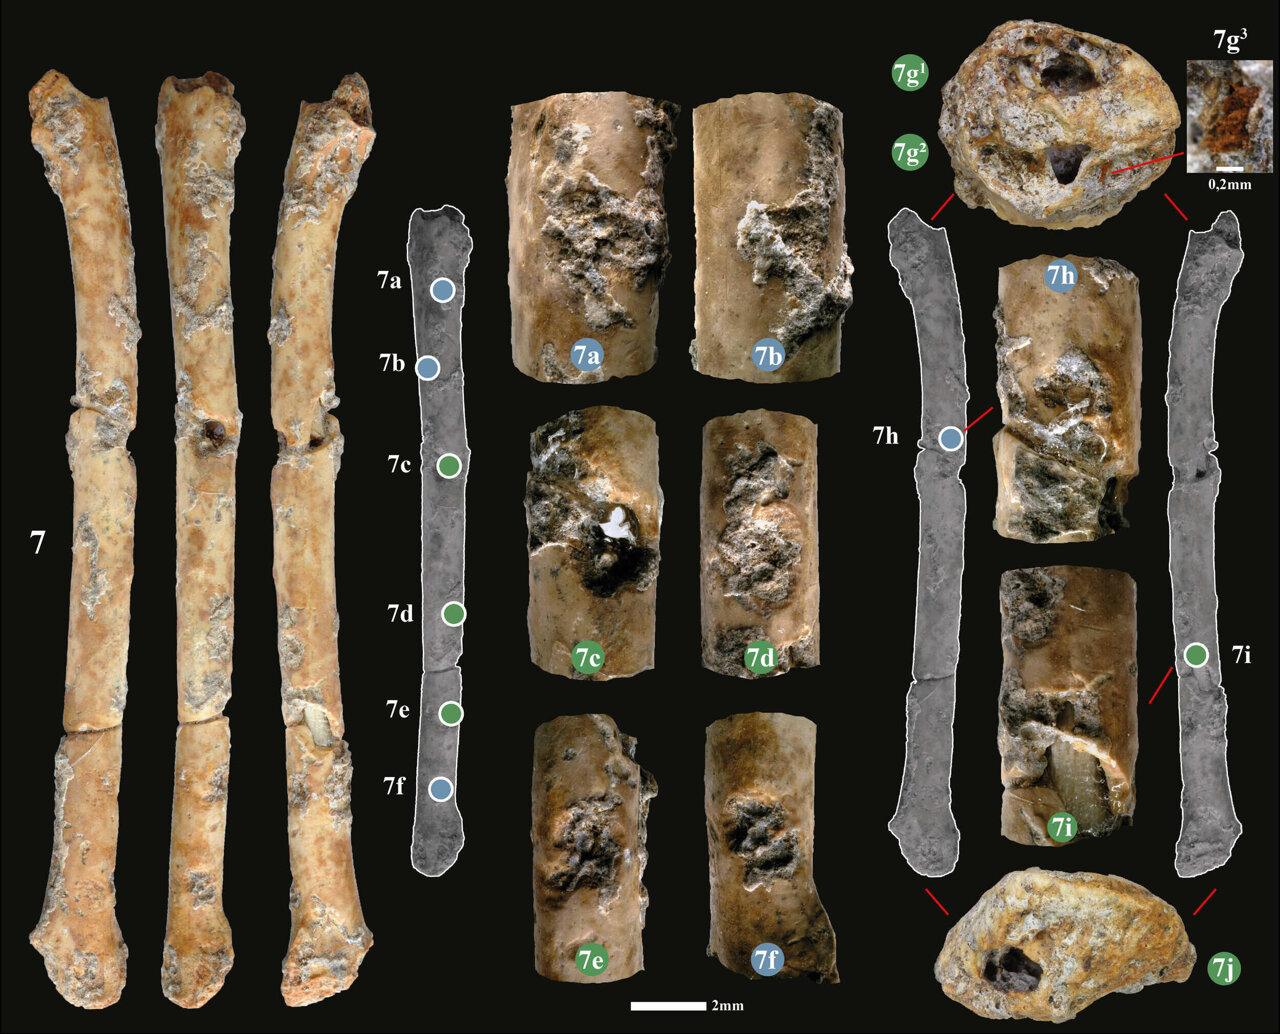 Researchers discover 12,000-year-old flutes made from bird bones